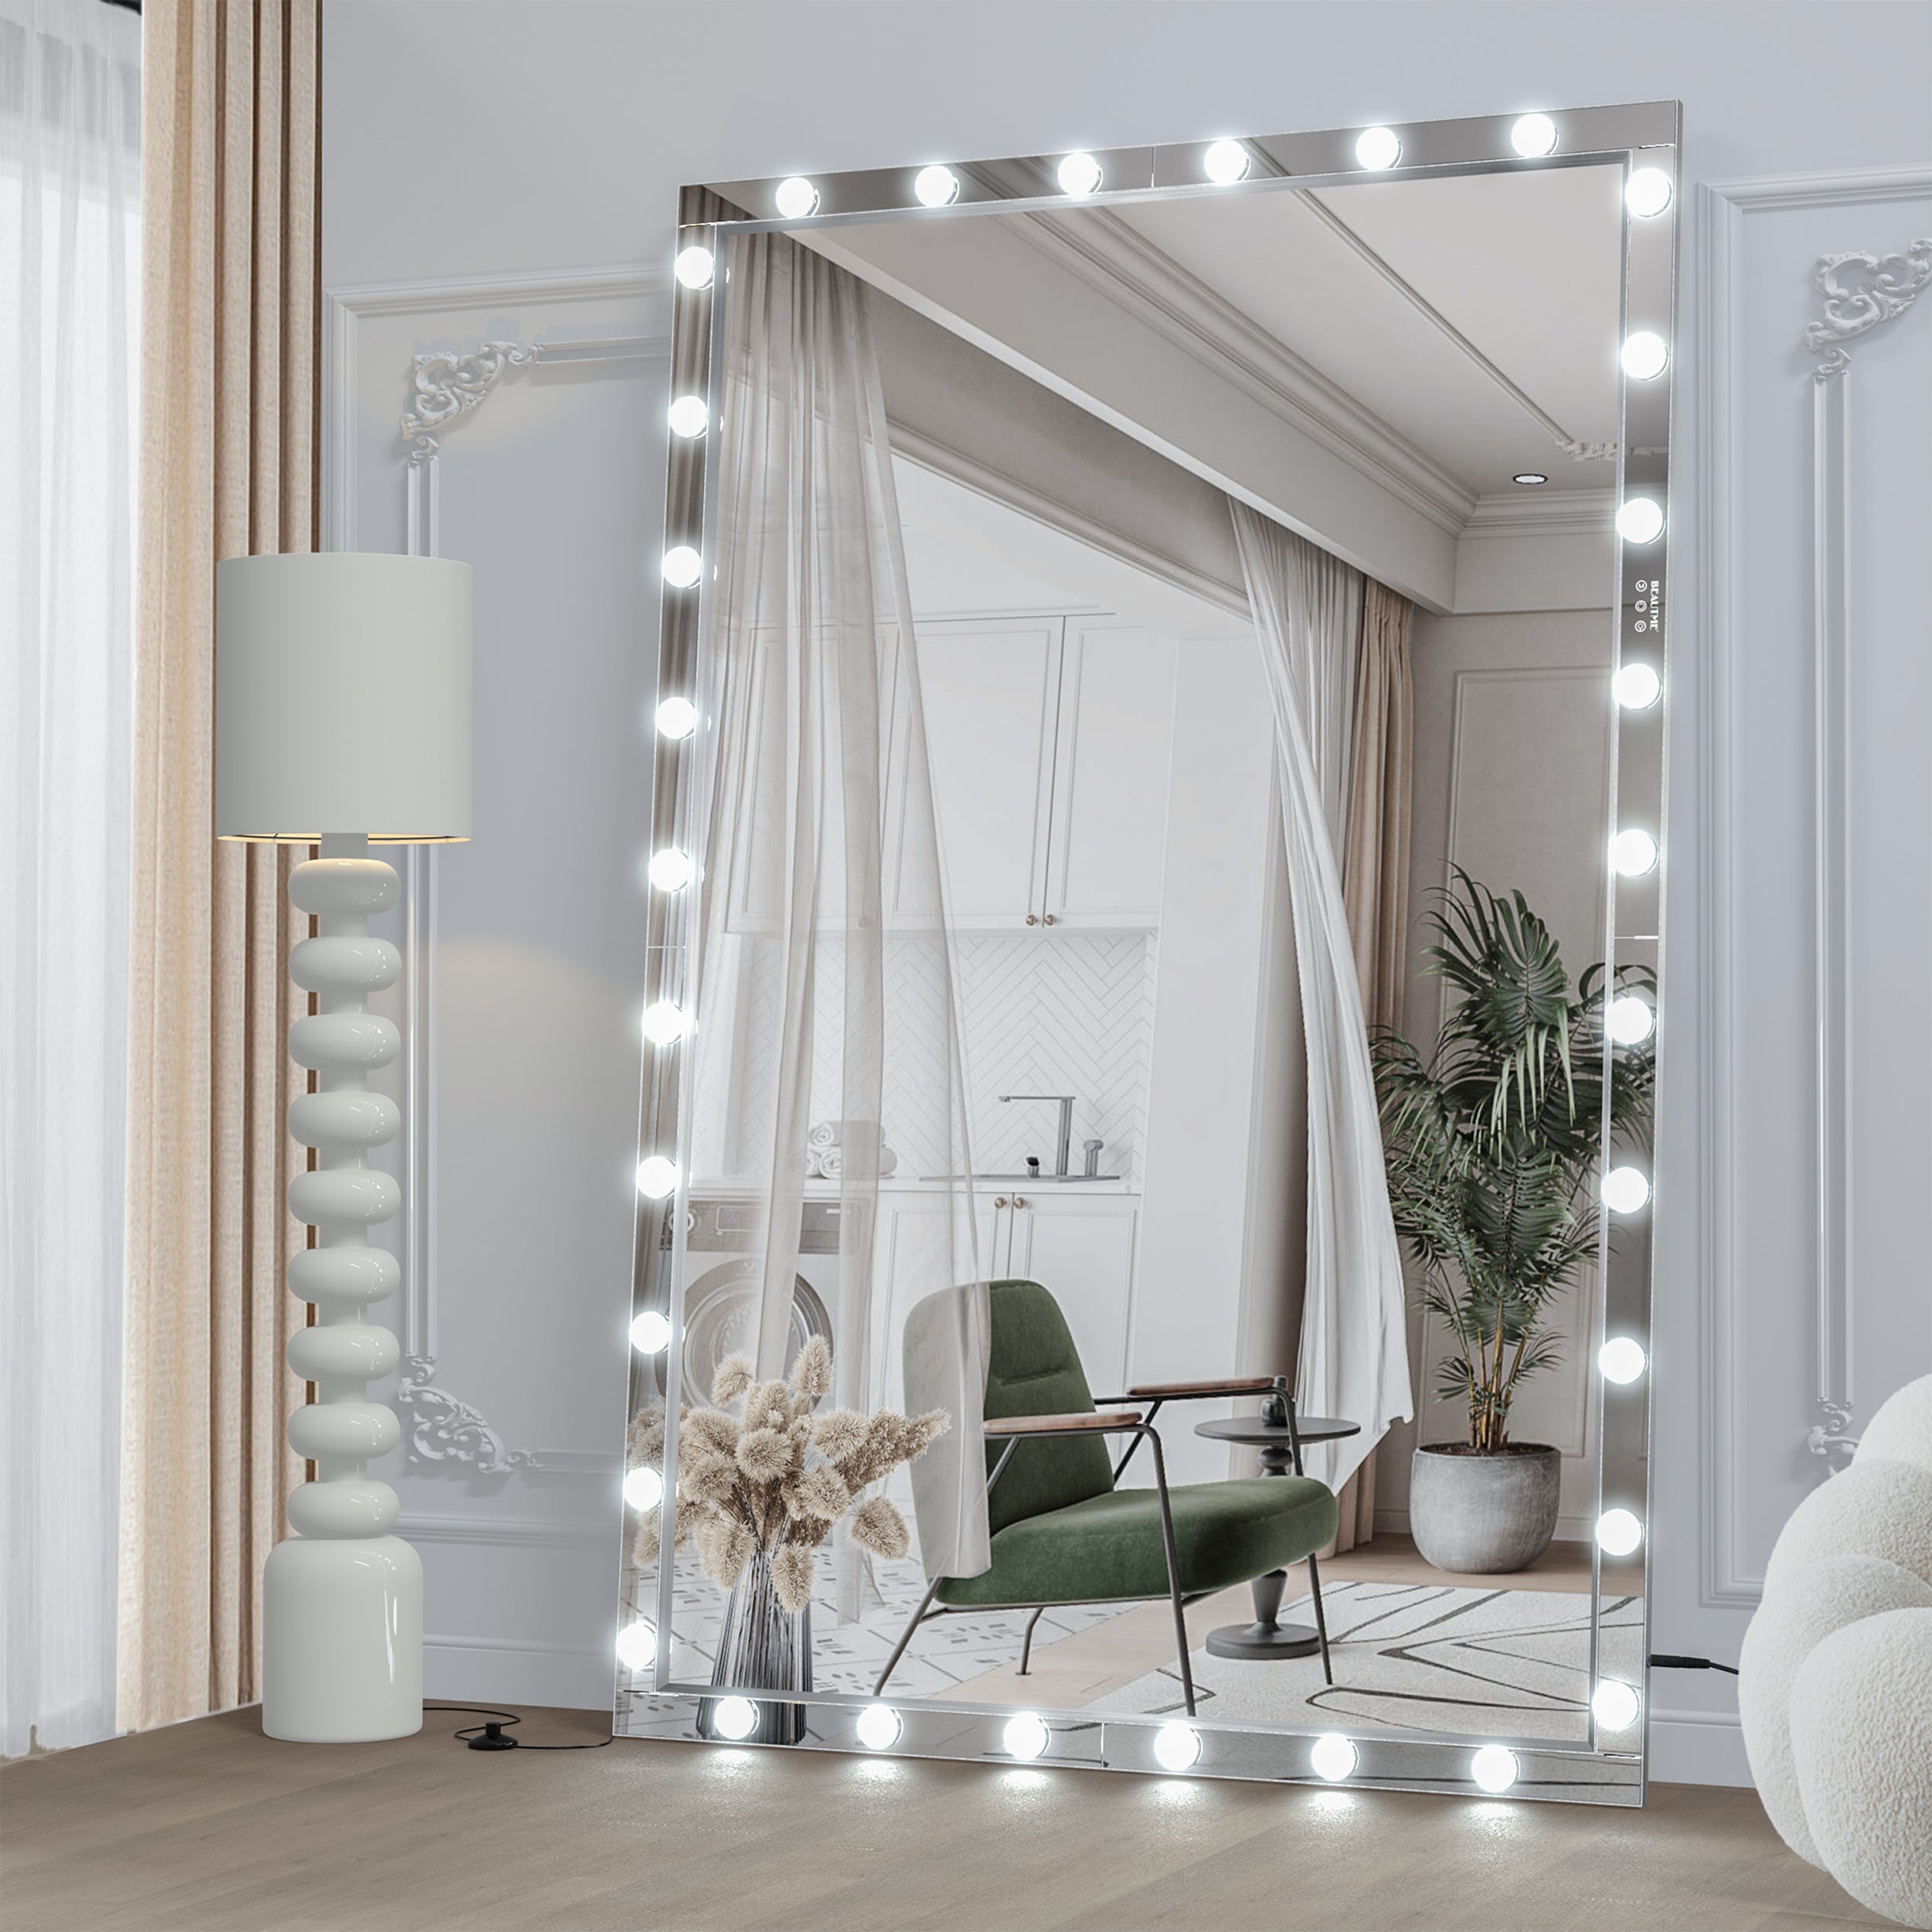 Hollywood LED Full Body Mirror with Lights Extra Large Full Length Vanity Mirror with 3 Color Mode Lights, Vertical Horizontal Hanging Aluminum Mirror for Dressing Rooms, Bedroom Silver, 72X48 inches